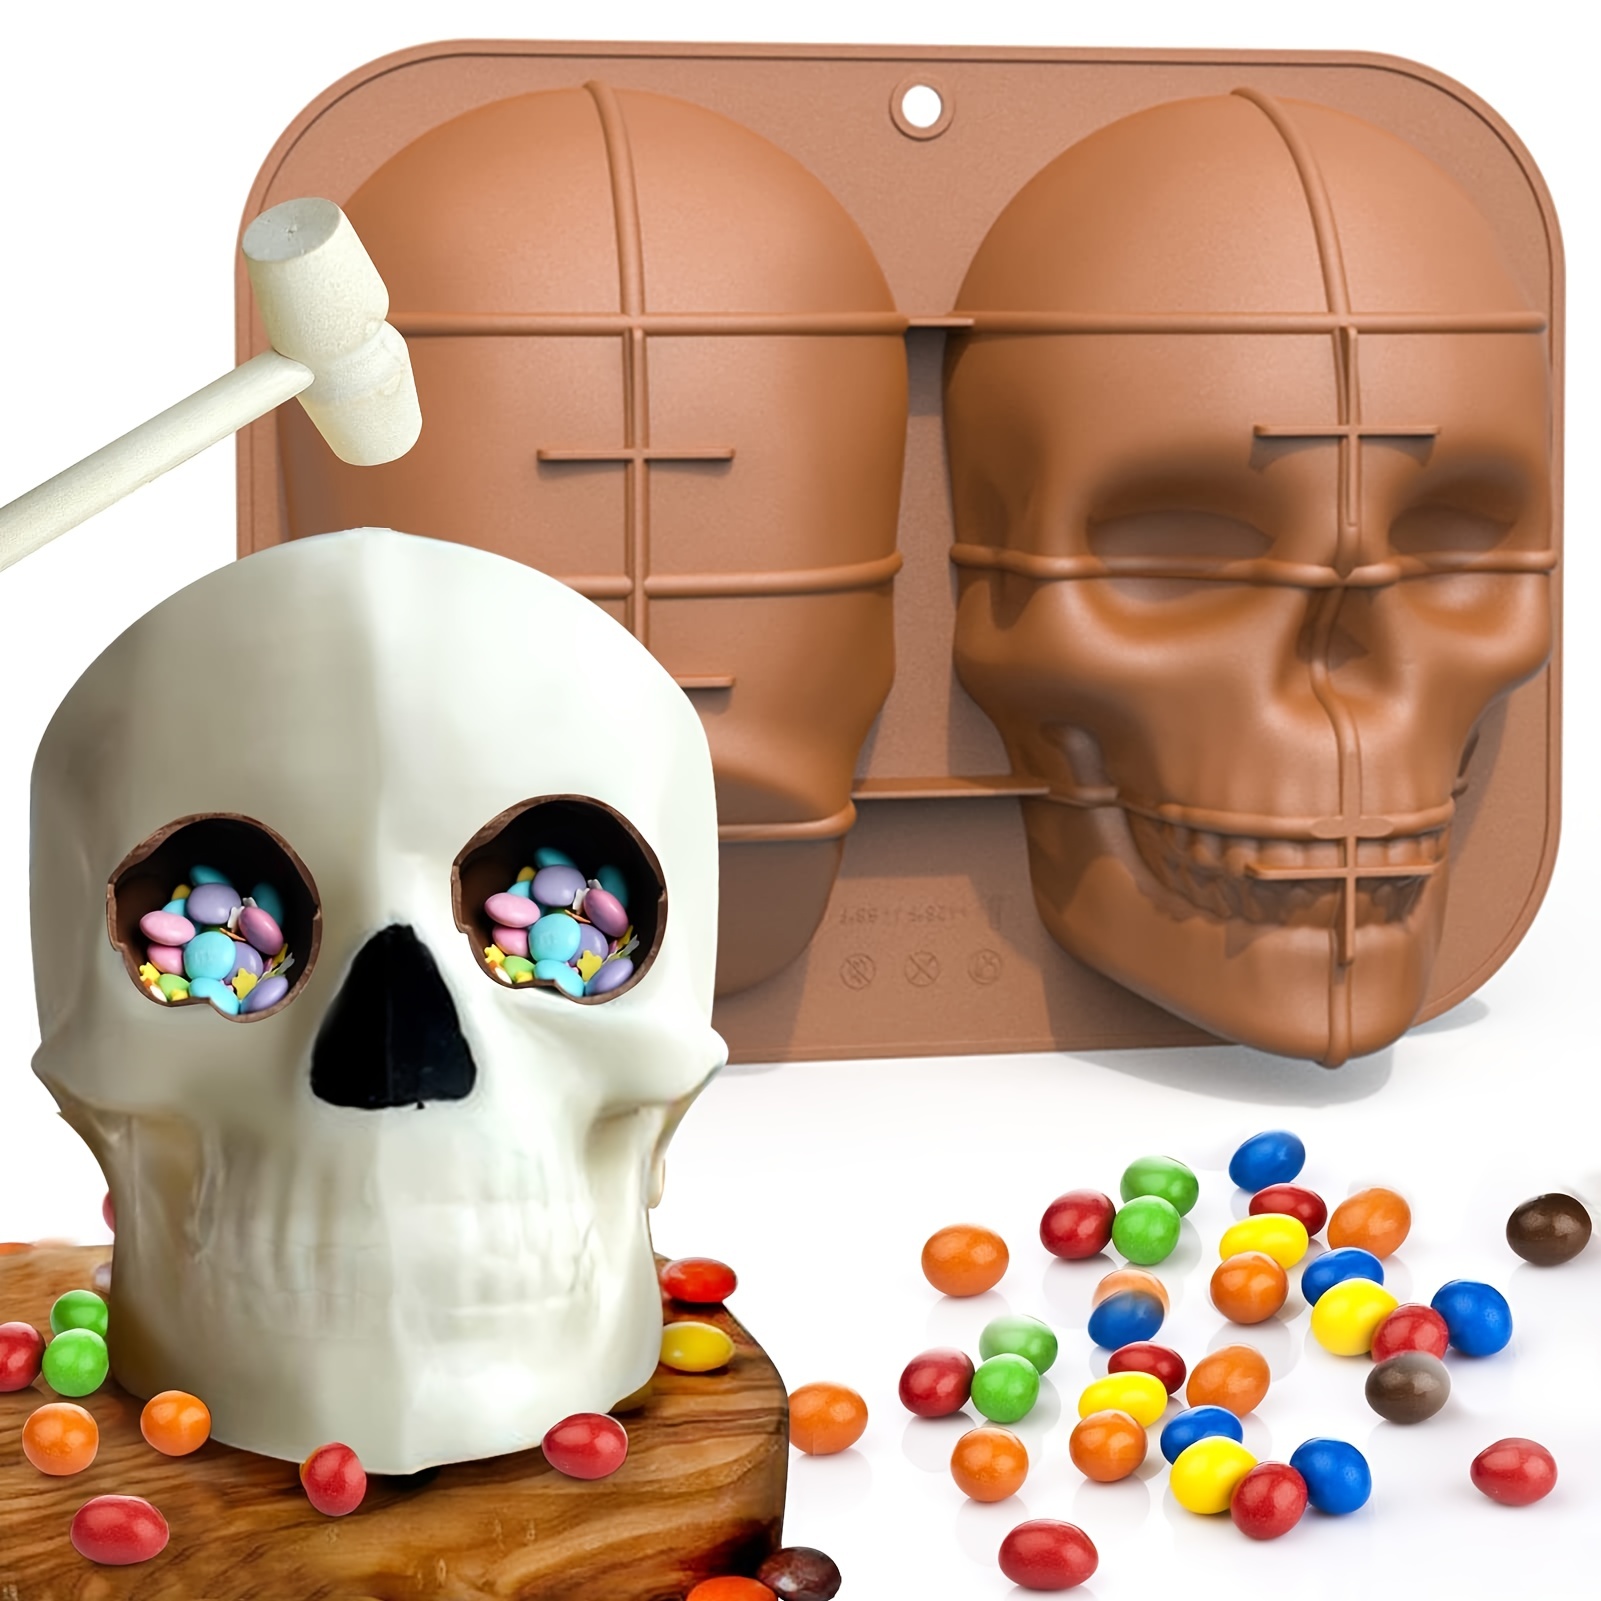 Ruziyoog Large Skull Cake Pan Haunted Skull Baking Cake Mold for Halloween and Birthday Party Coffee, Adult Unisex, Size: 12.6, Brown